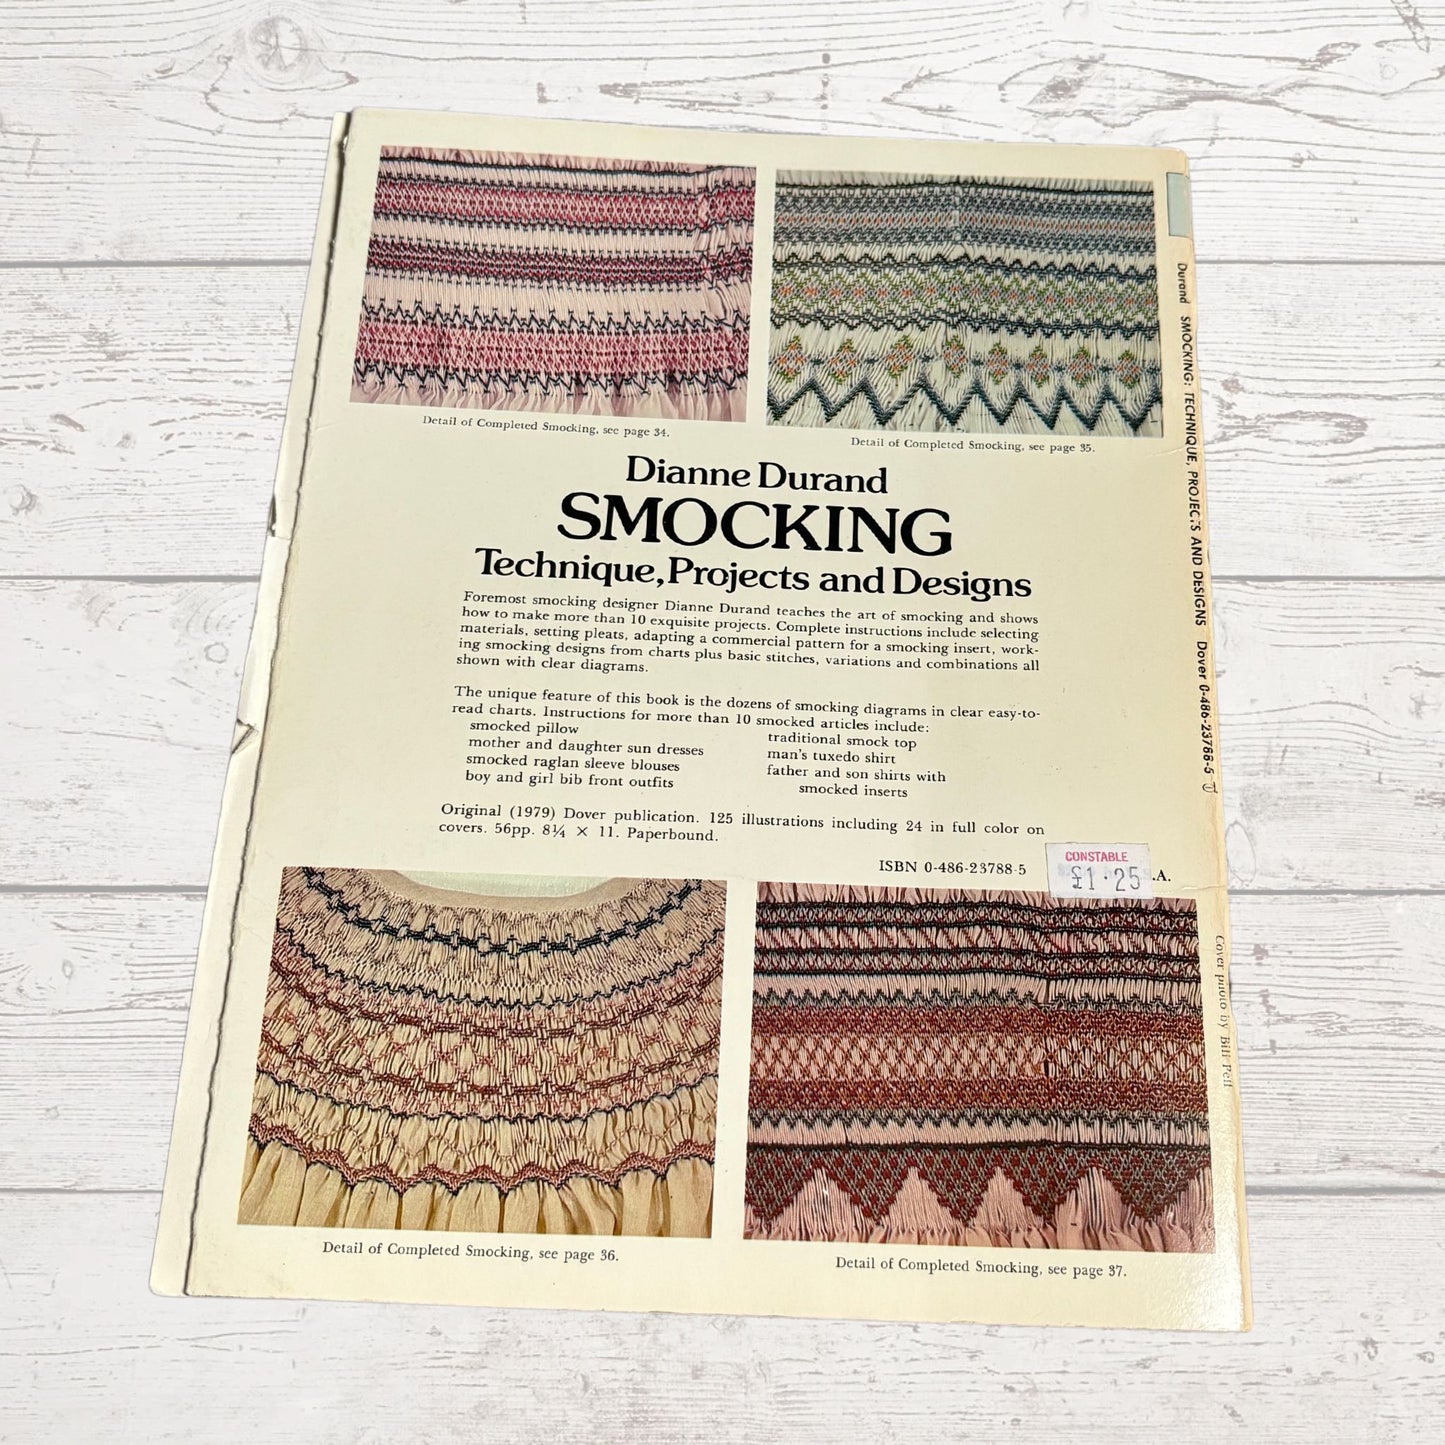 Smocking : Technique, Projects and Designs - A 1970s Sewing Book by Dianne Durand